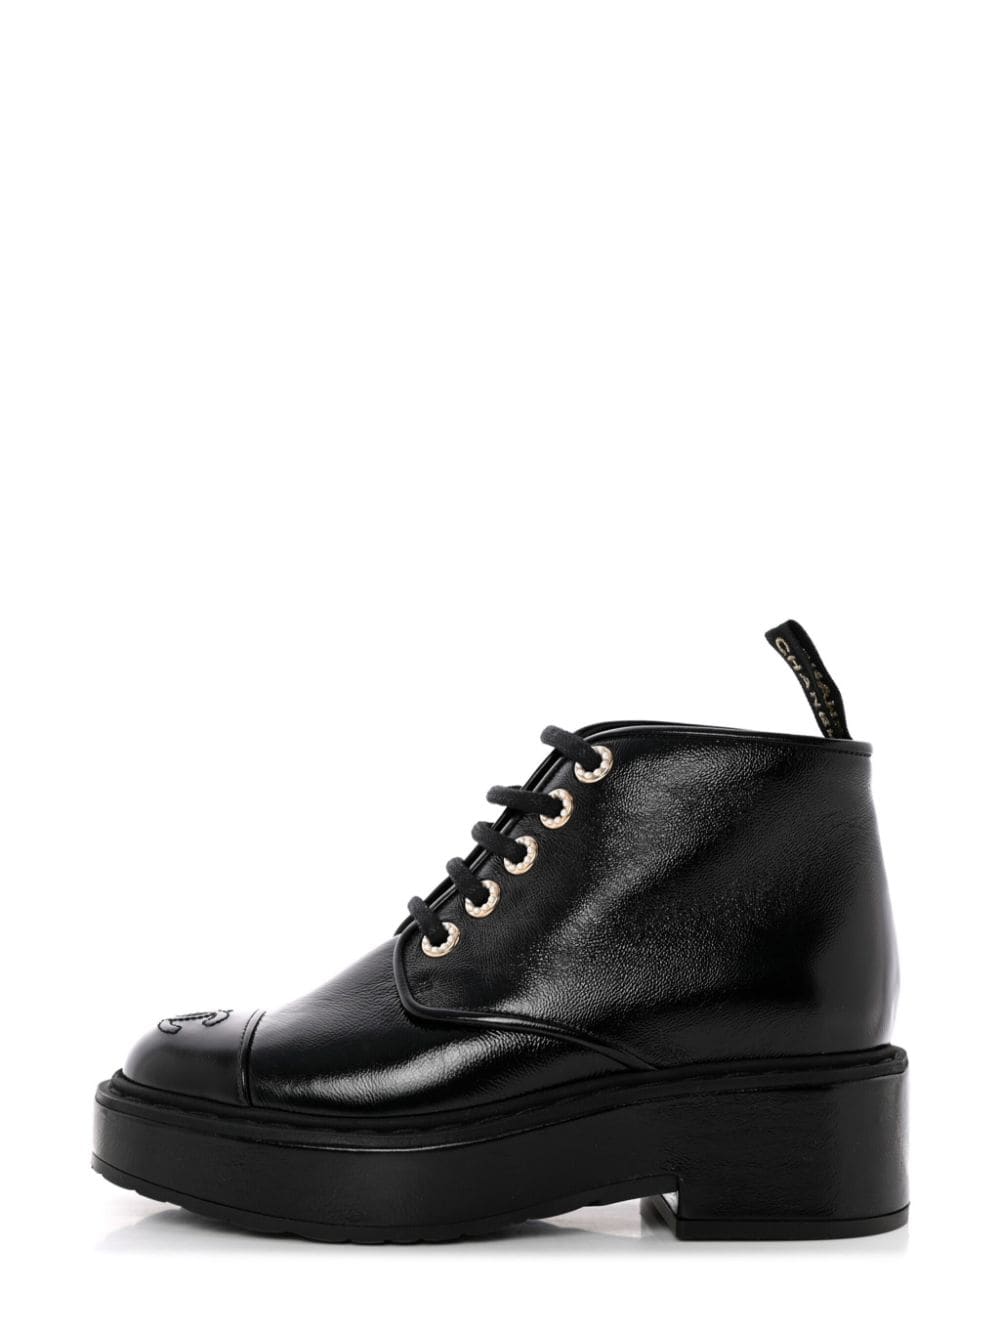 Pre-owned Chanel Cc Stitch Combat Boots In Black